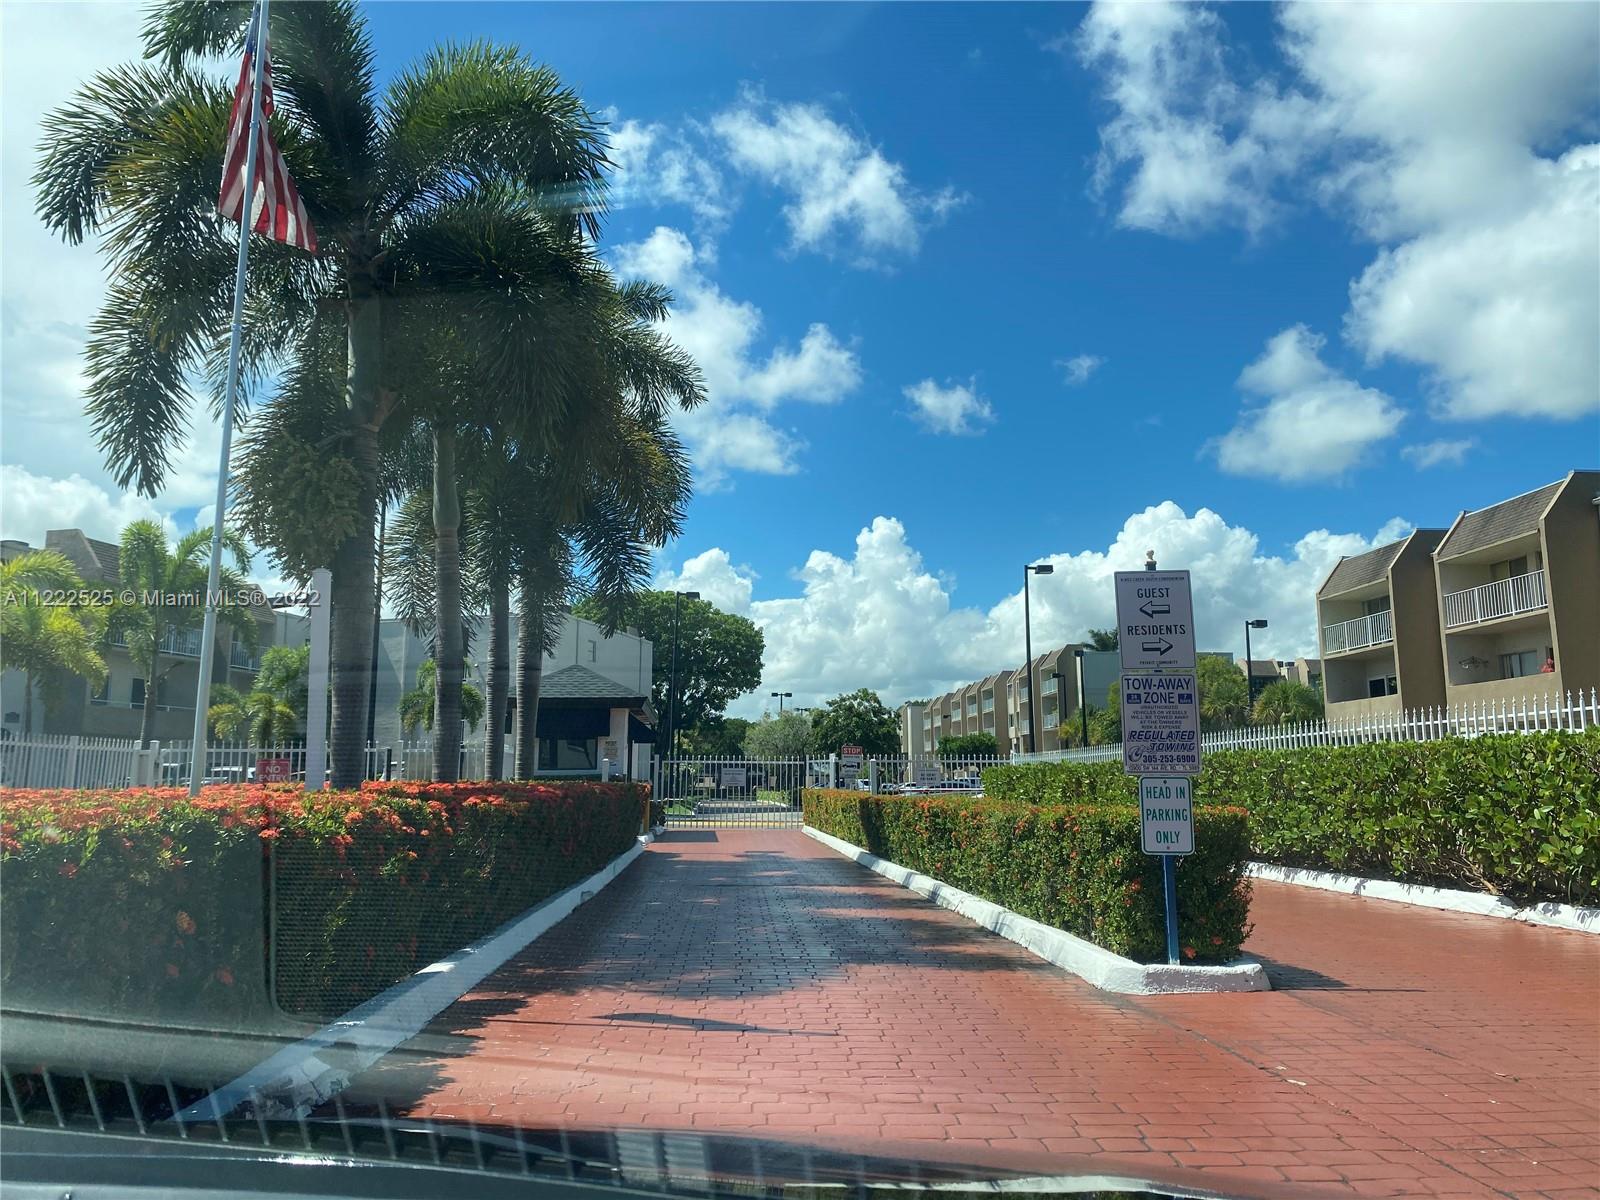 Location, Location, Location!!!! This Kings Creek South looking for 1 bedroom in the prefect location within minutes to the 826 Palmetto highway, Dadeland station Metro rail and just more? You found it. The unit needs some TLC . Please contact listing agent for showings.